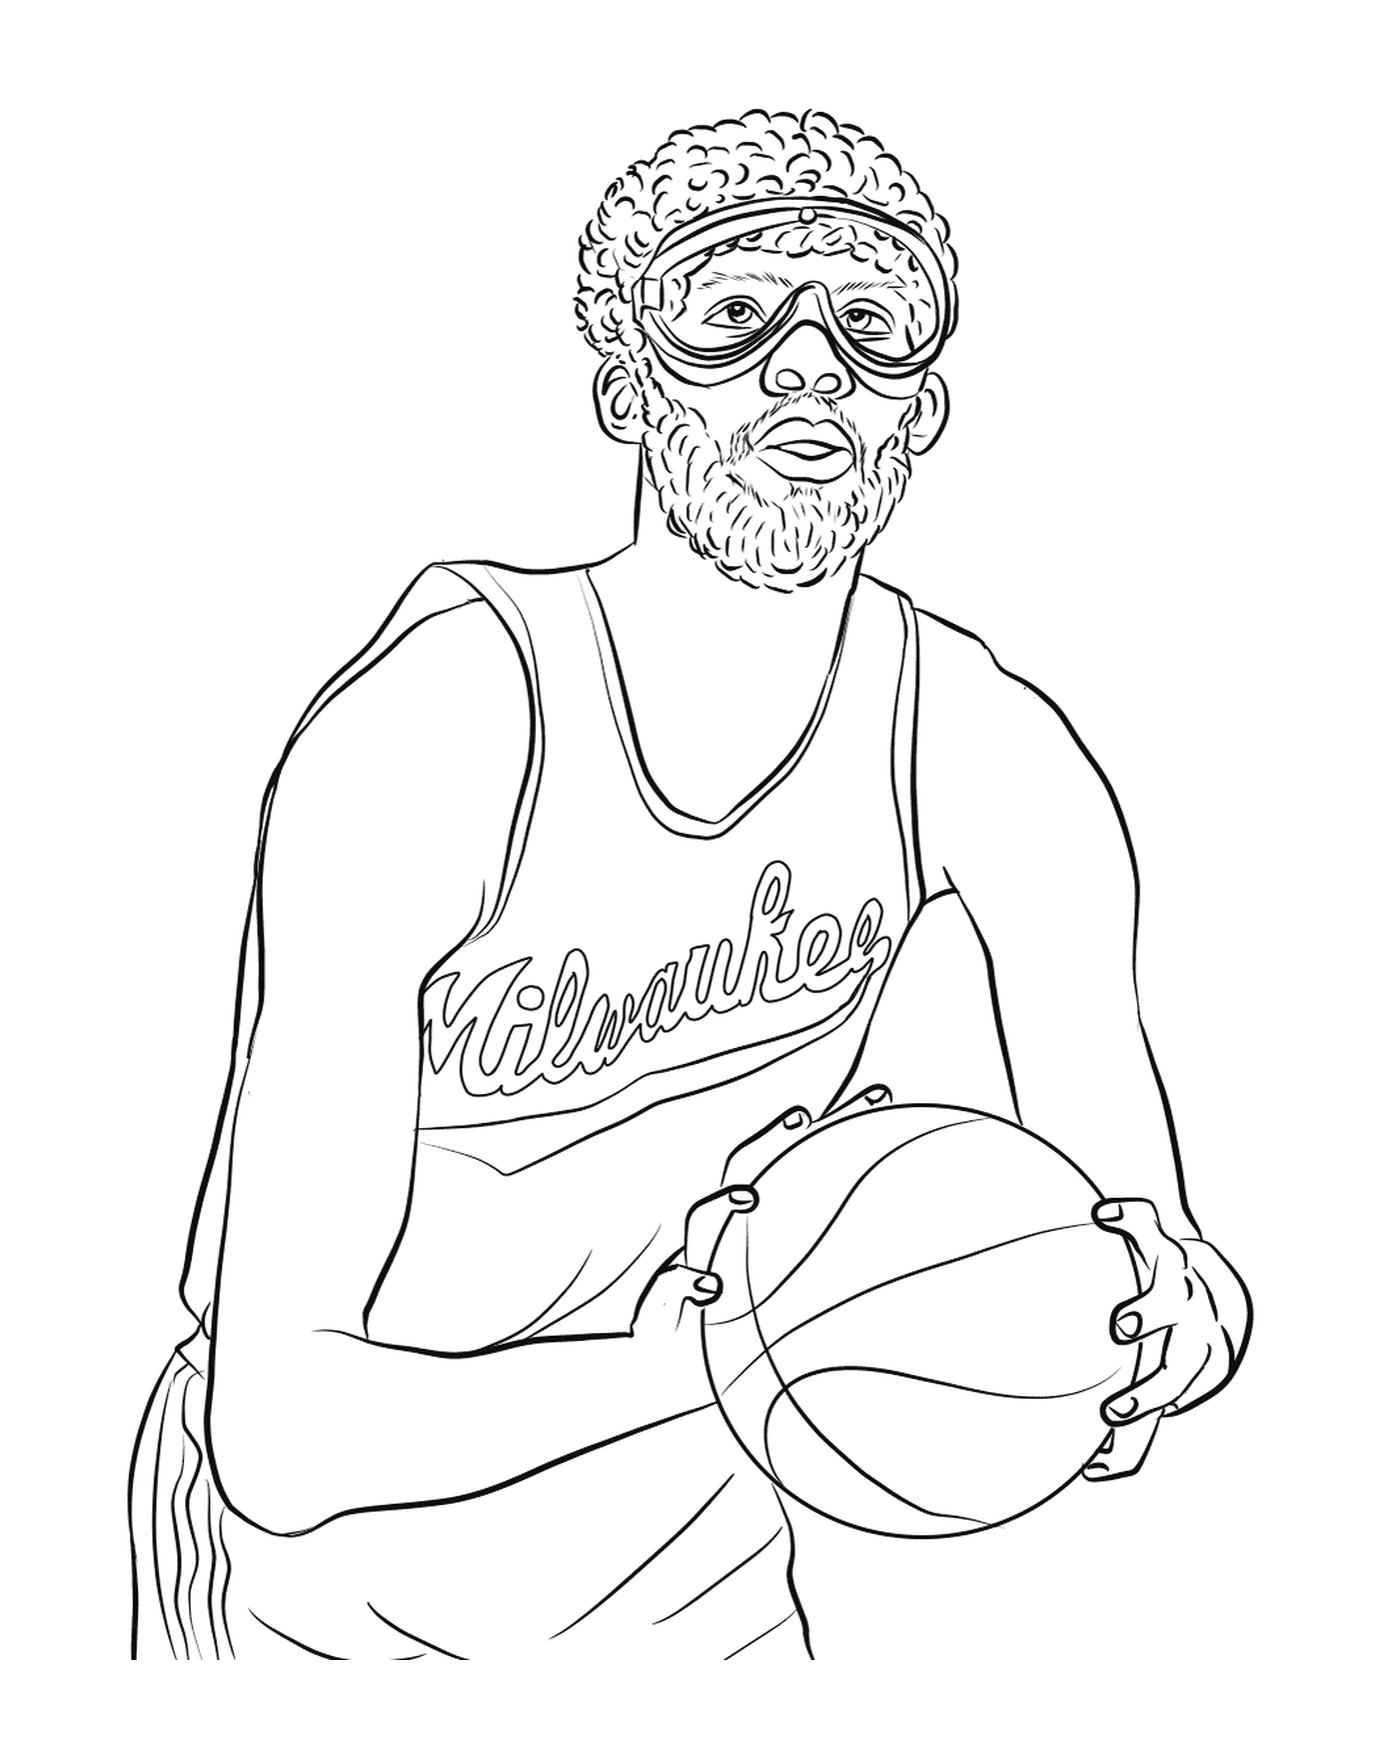  A man holding a basketball in his hands 